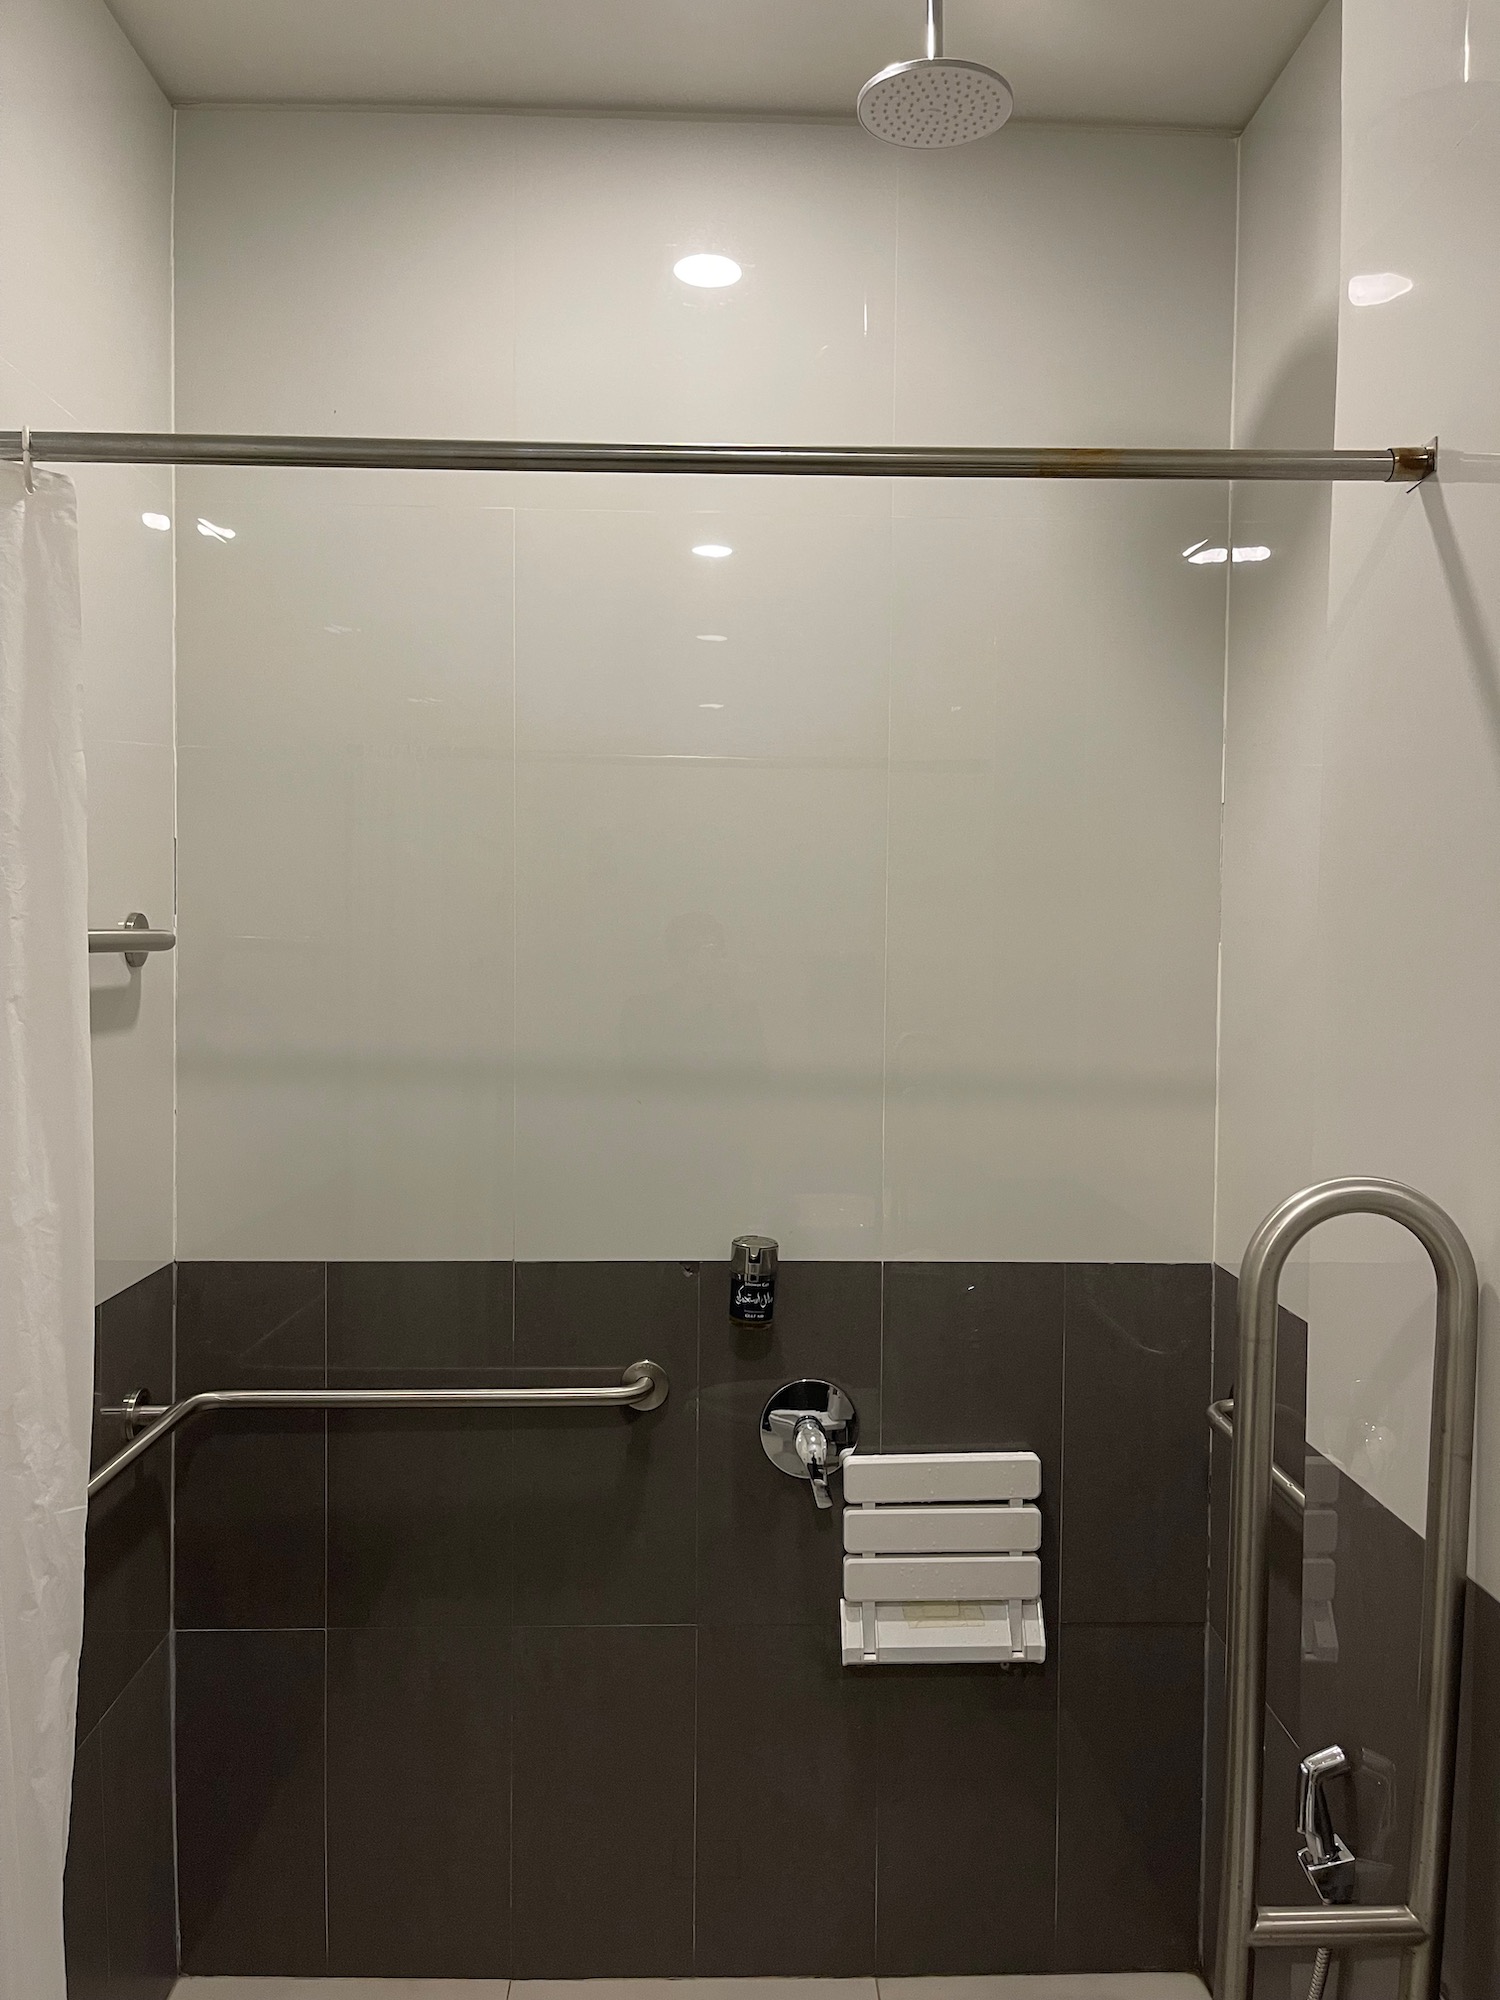 a shower with a handrail and a metal bar